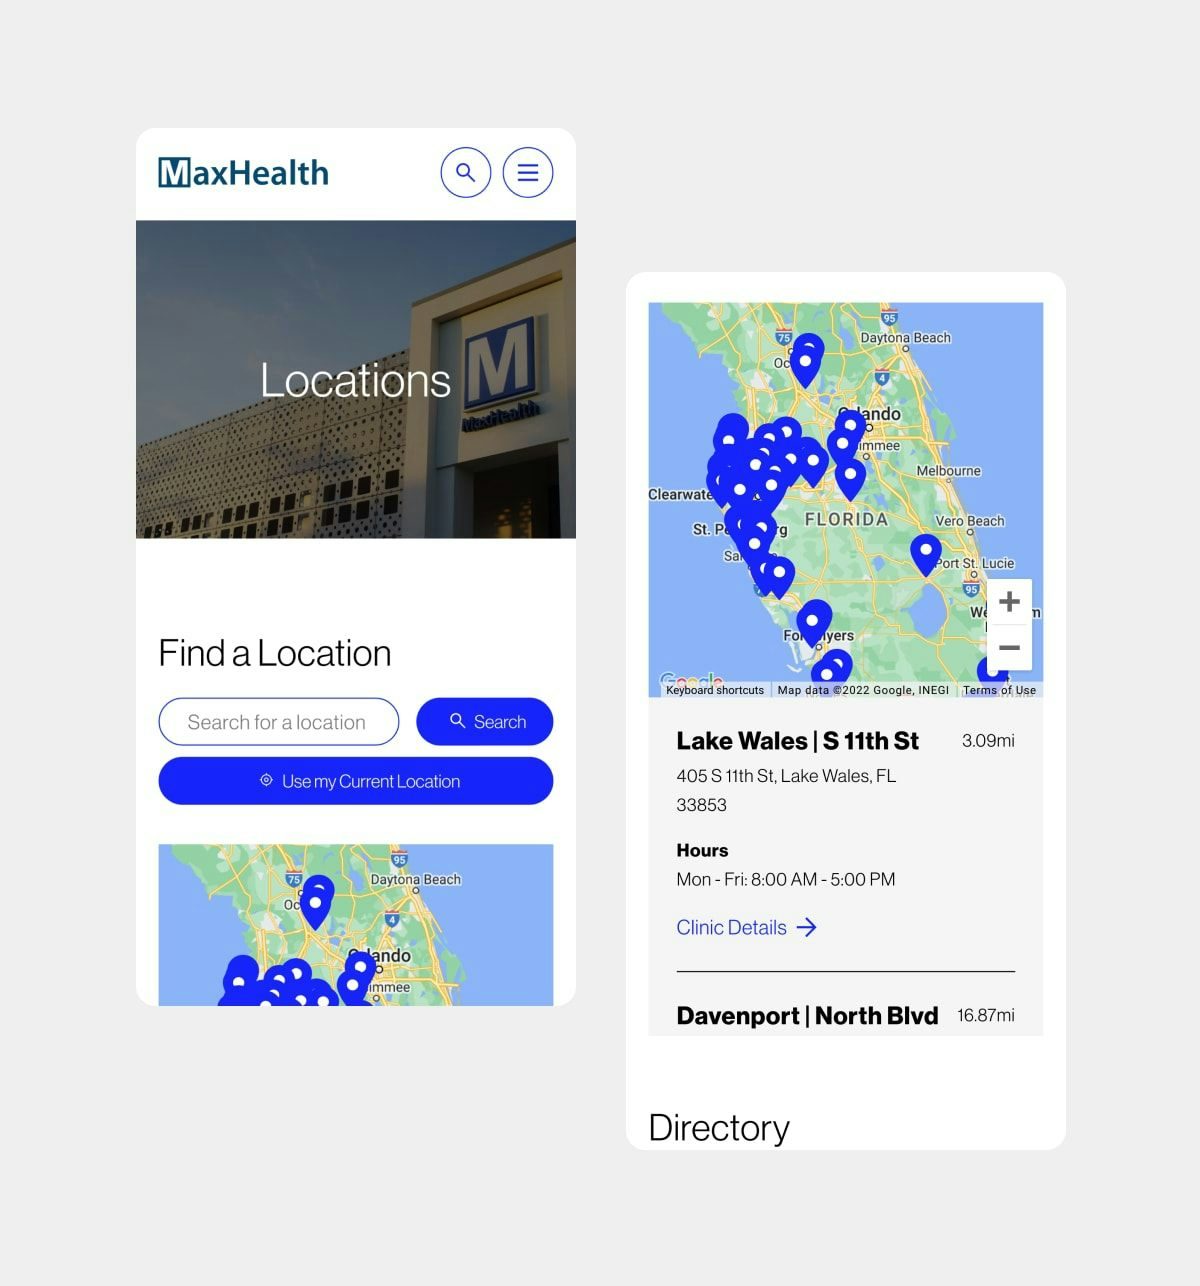 Side by side mobile mockups of MaxHealth's location page